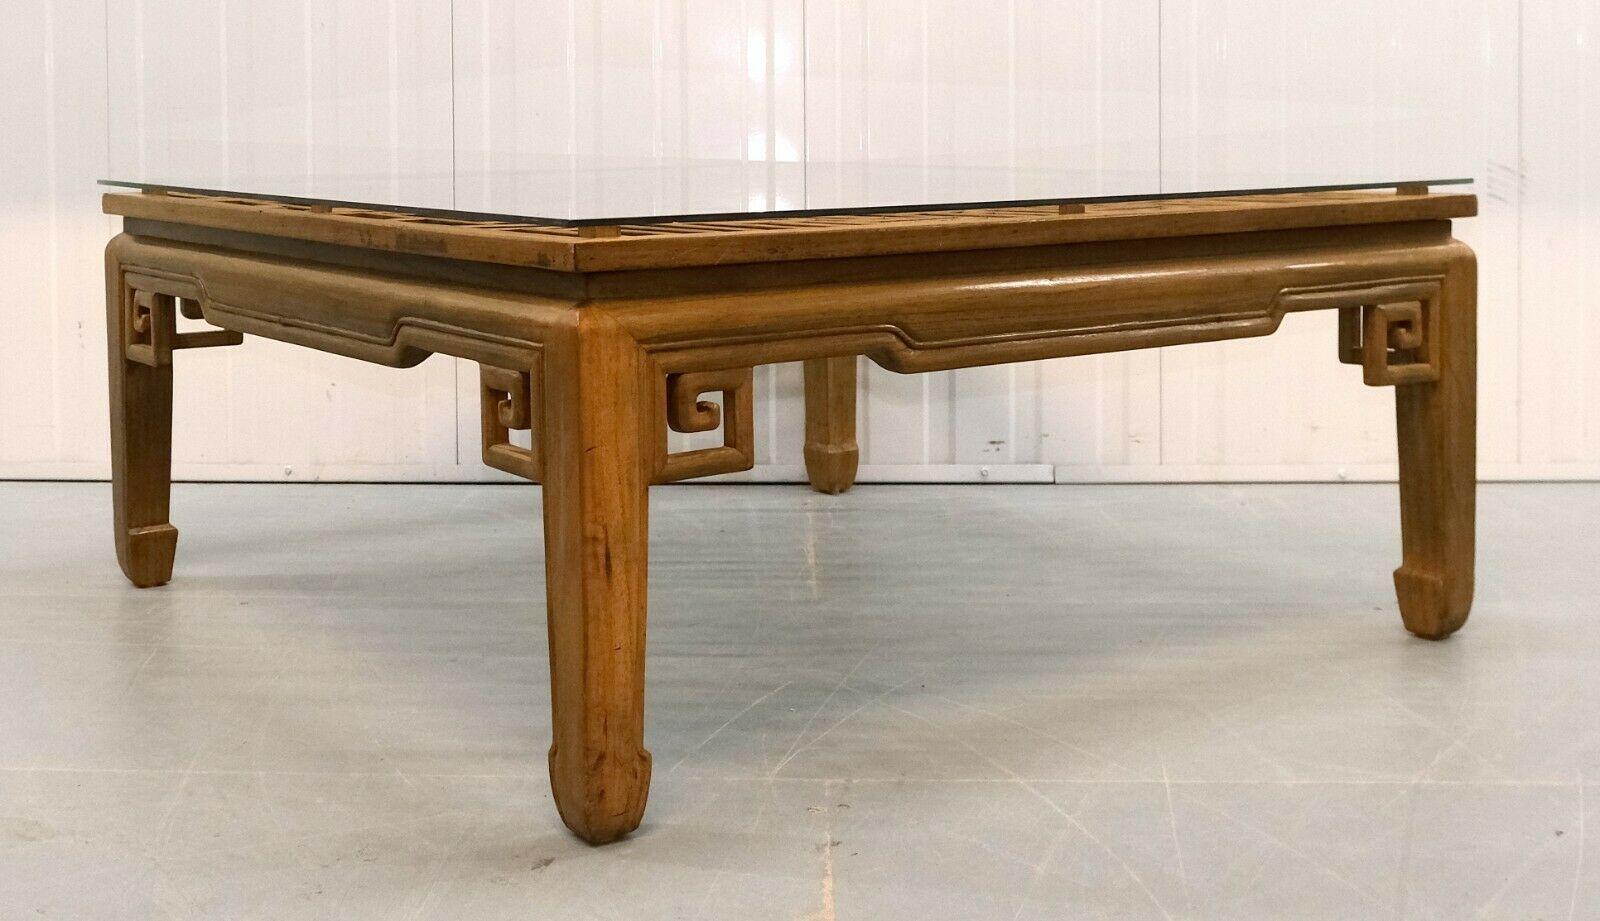 Chinese Export Beautiful Large Square Chinese Teak Coffee Table with Glass Top & Hoof Feet